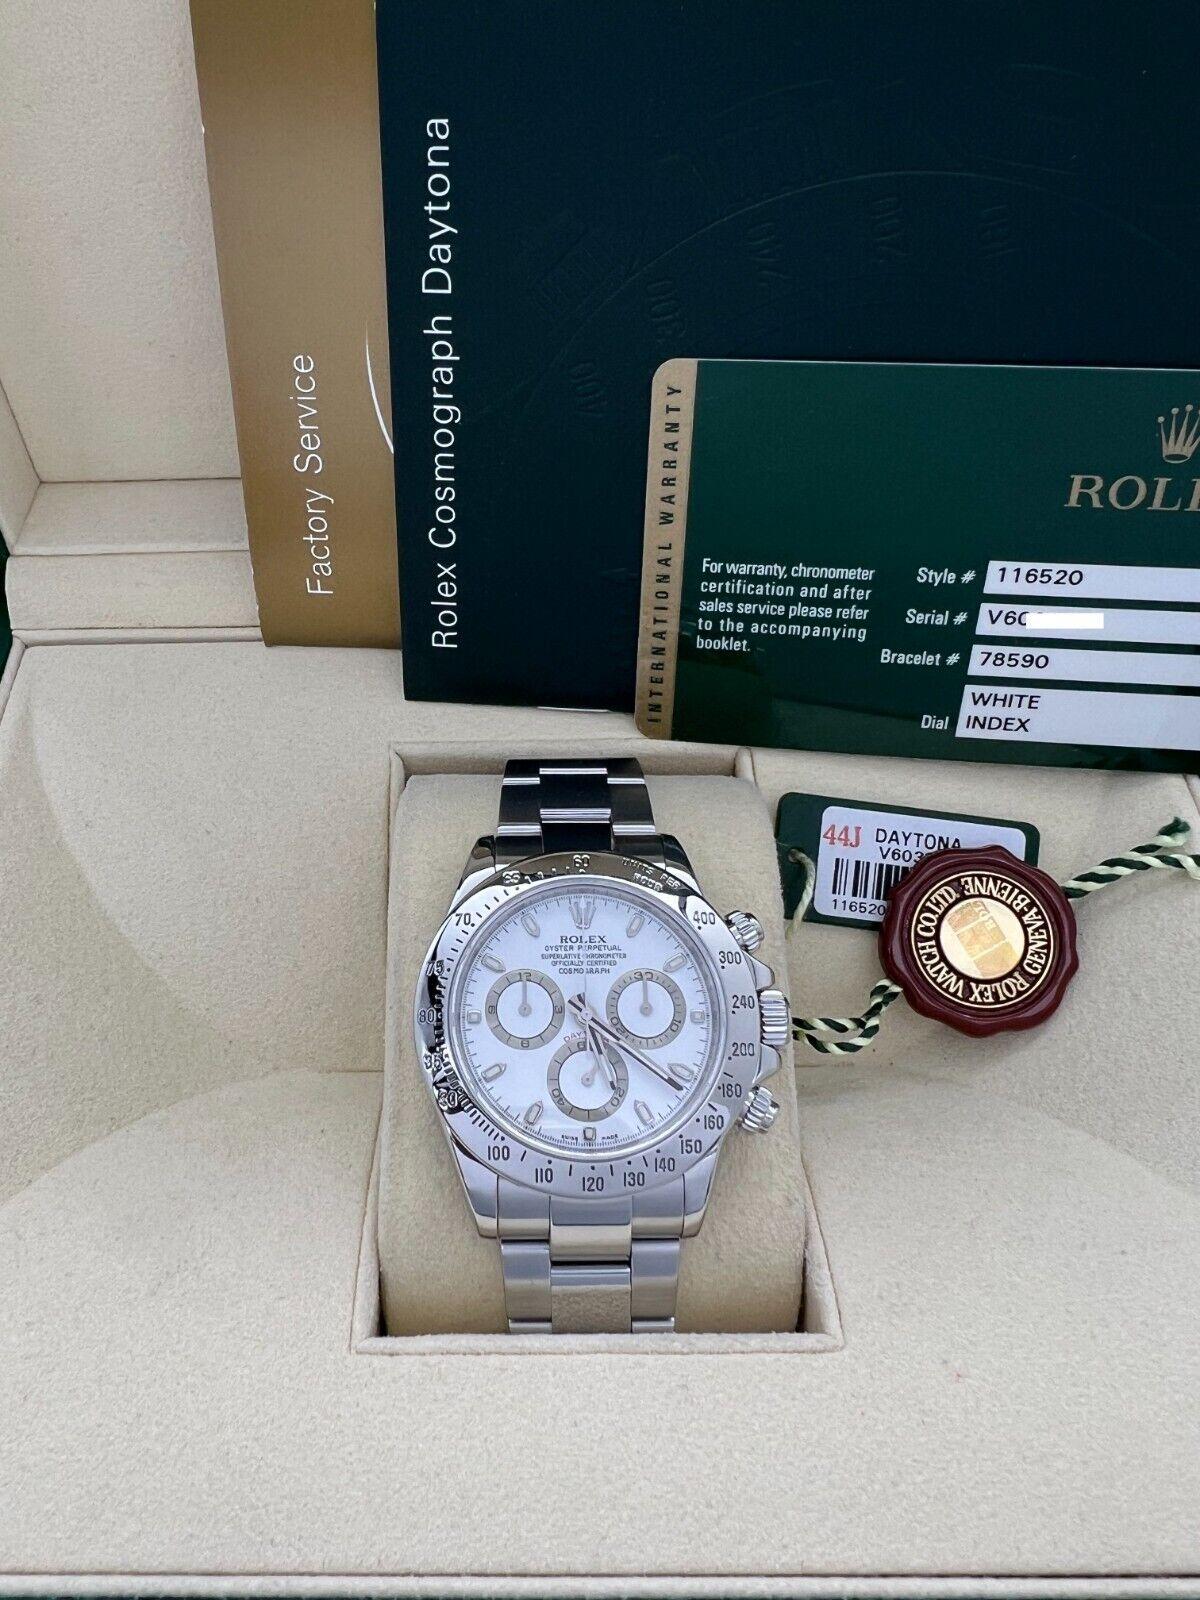 Rolex 116520 Daytona White Dial Stainless Steel Box Paper OPEN CARD 6